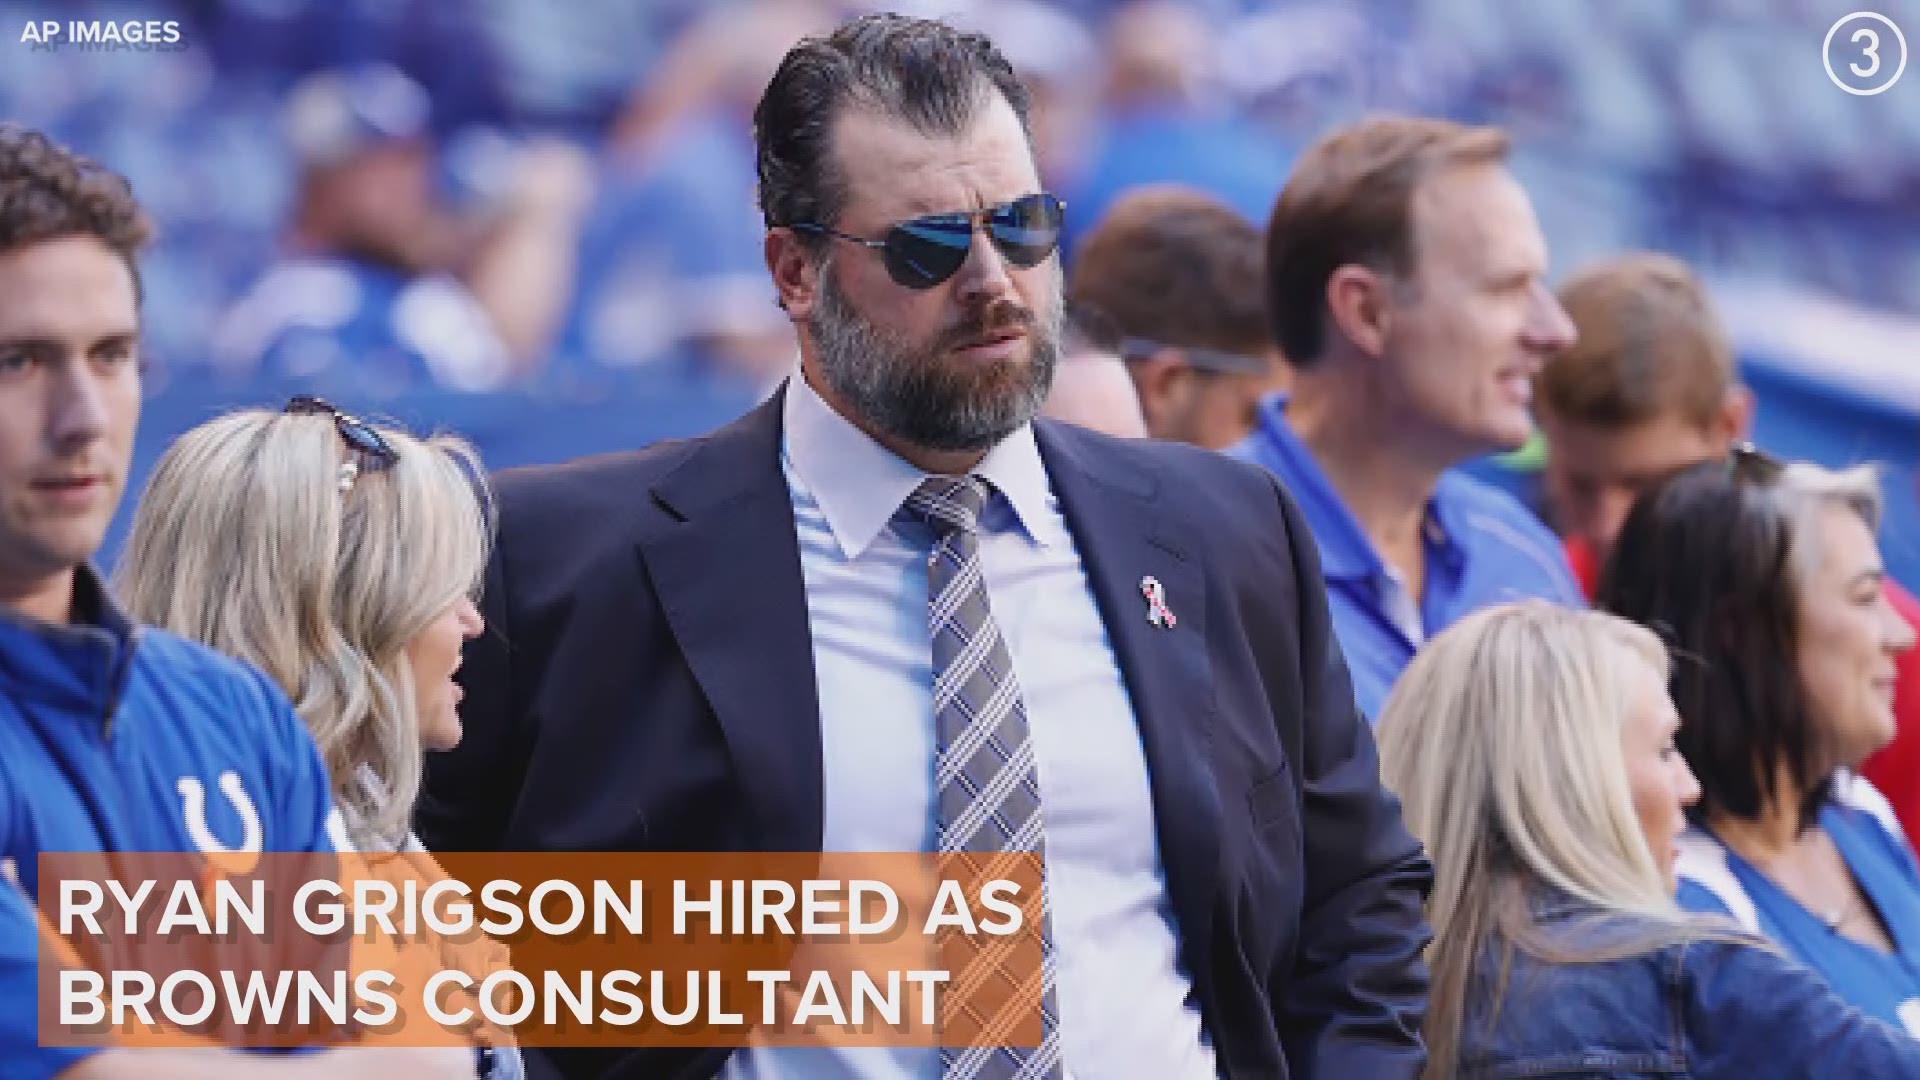 Cleveland Browns have reportedly hired Ryan Grigson in an “advisory and consulting role.” This marks the second time Grigson and Andrew Berry have worked together.